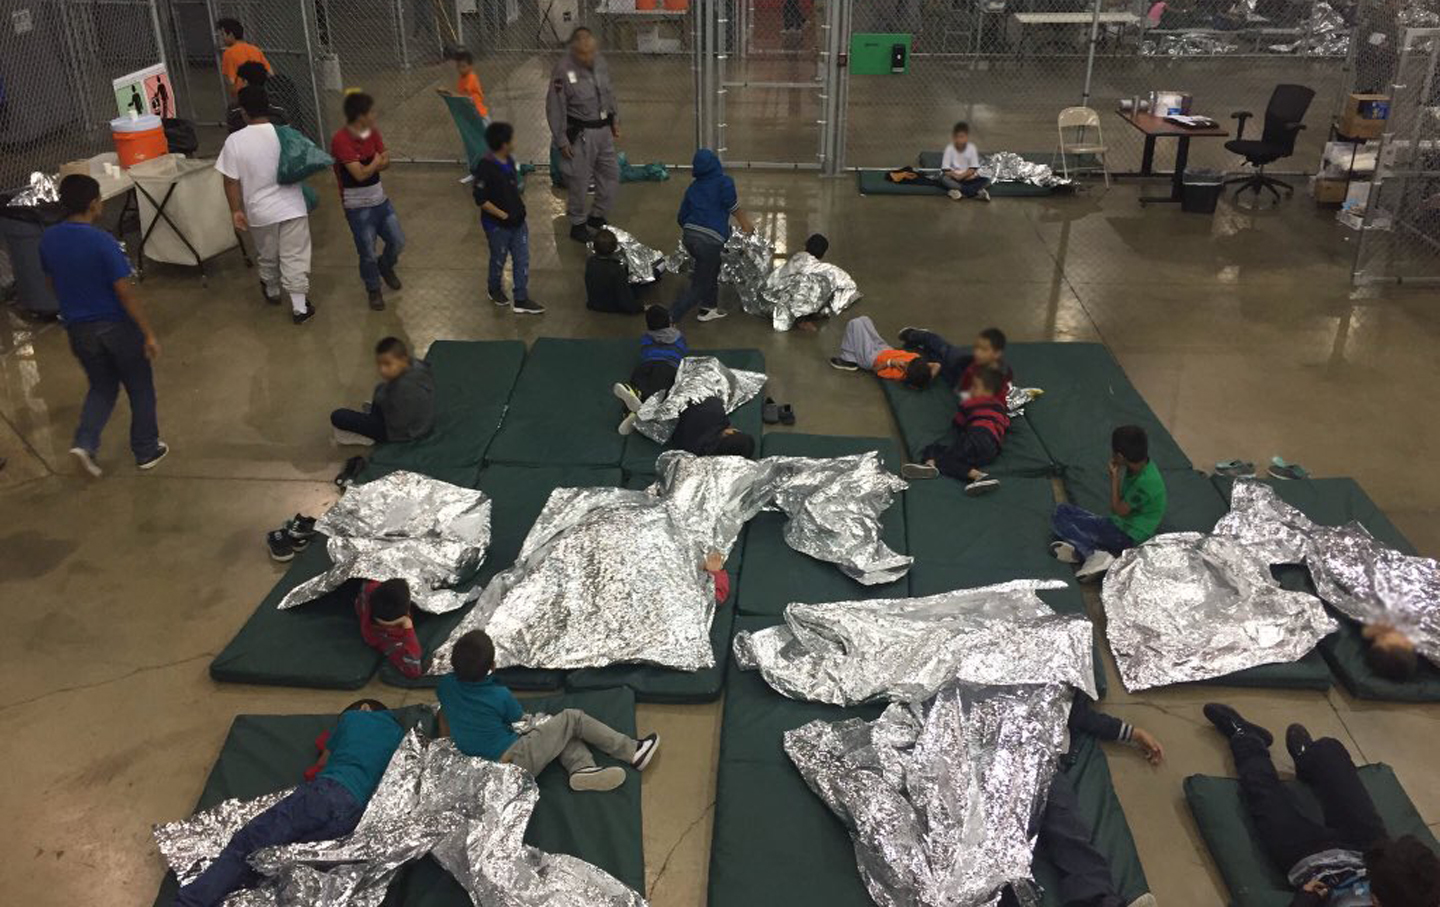 What It’s Like Inside a Border Patrol Facility Where Families Are Being Separated